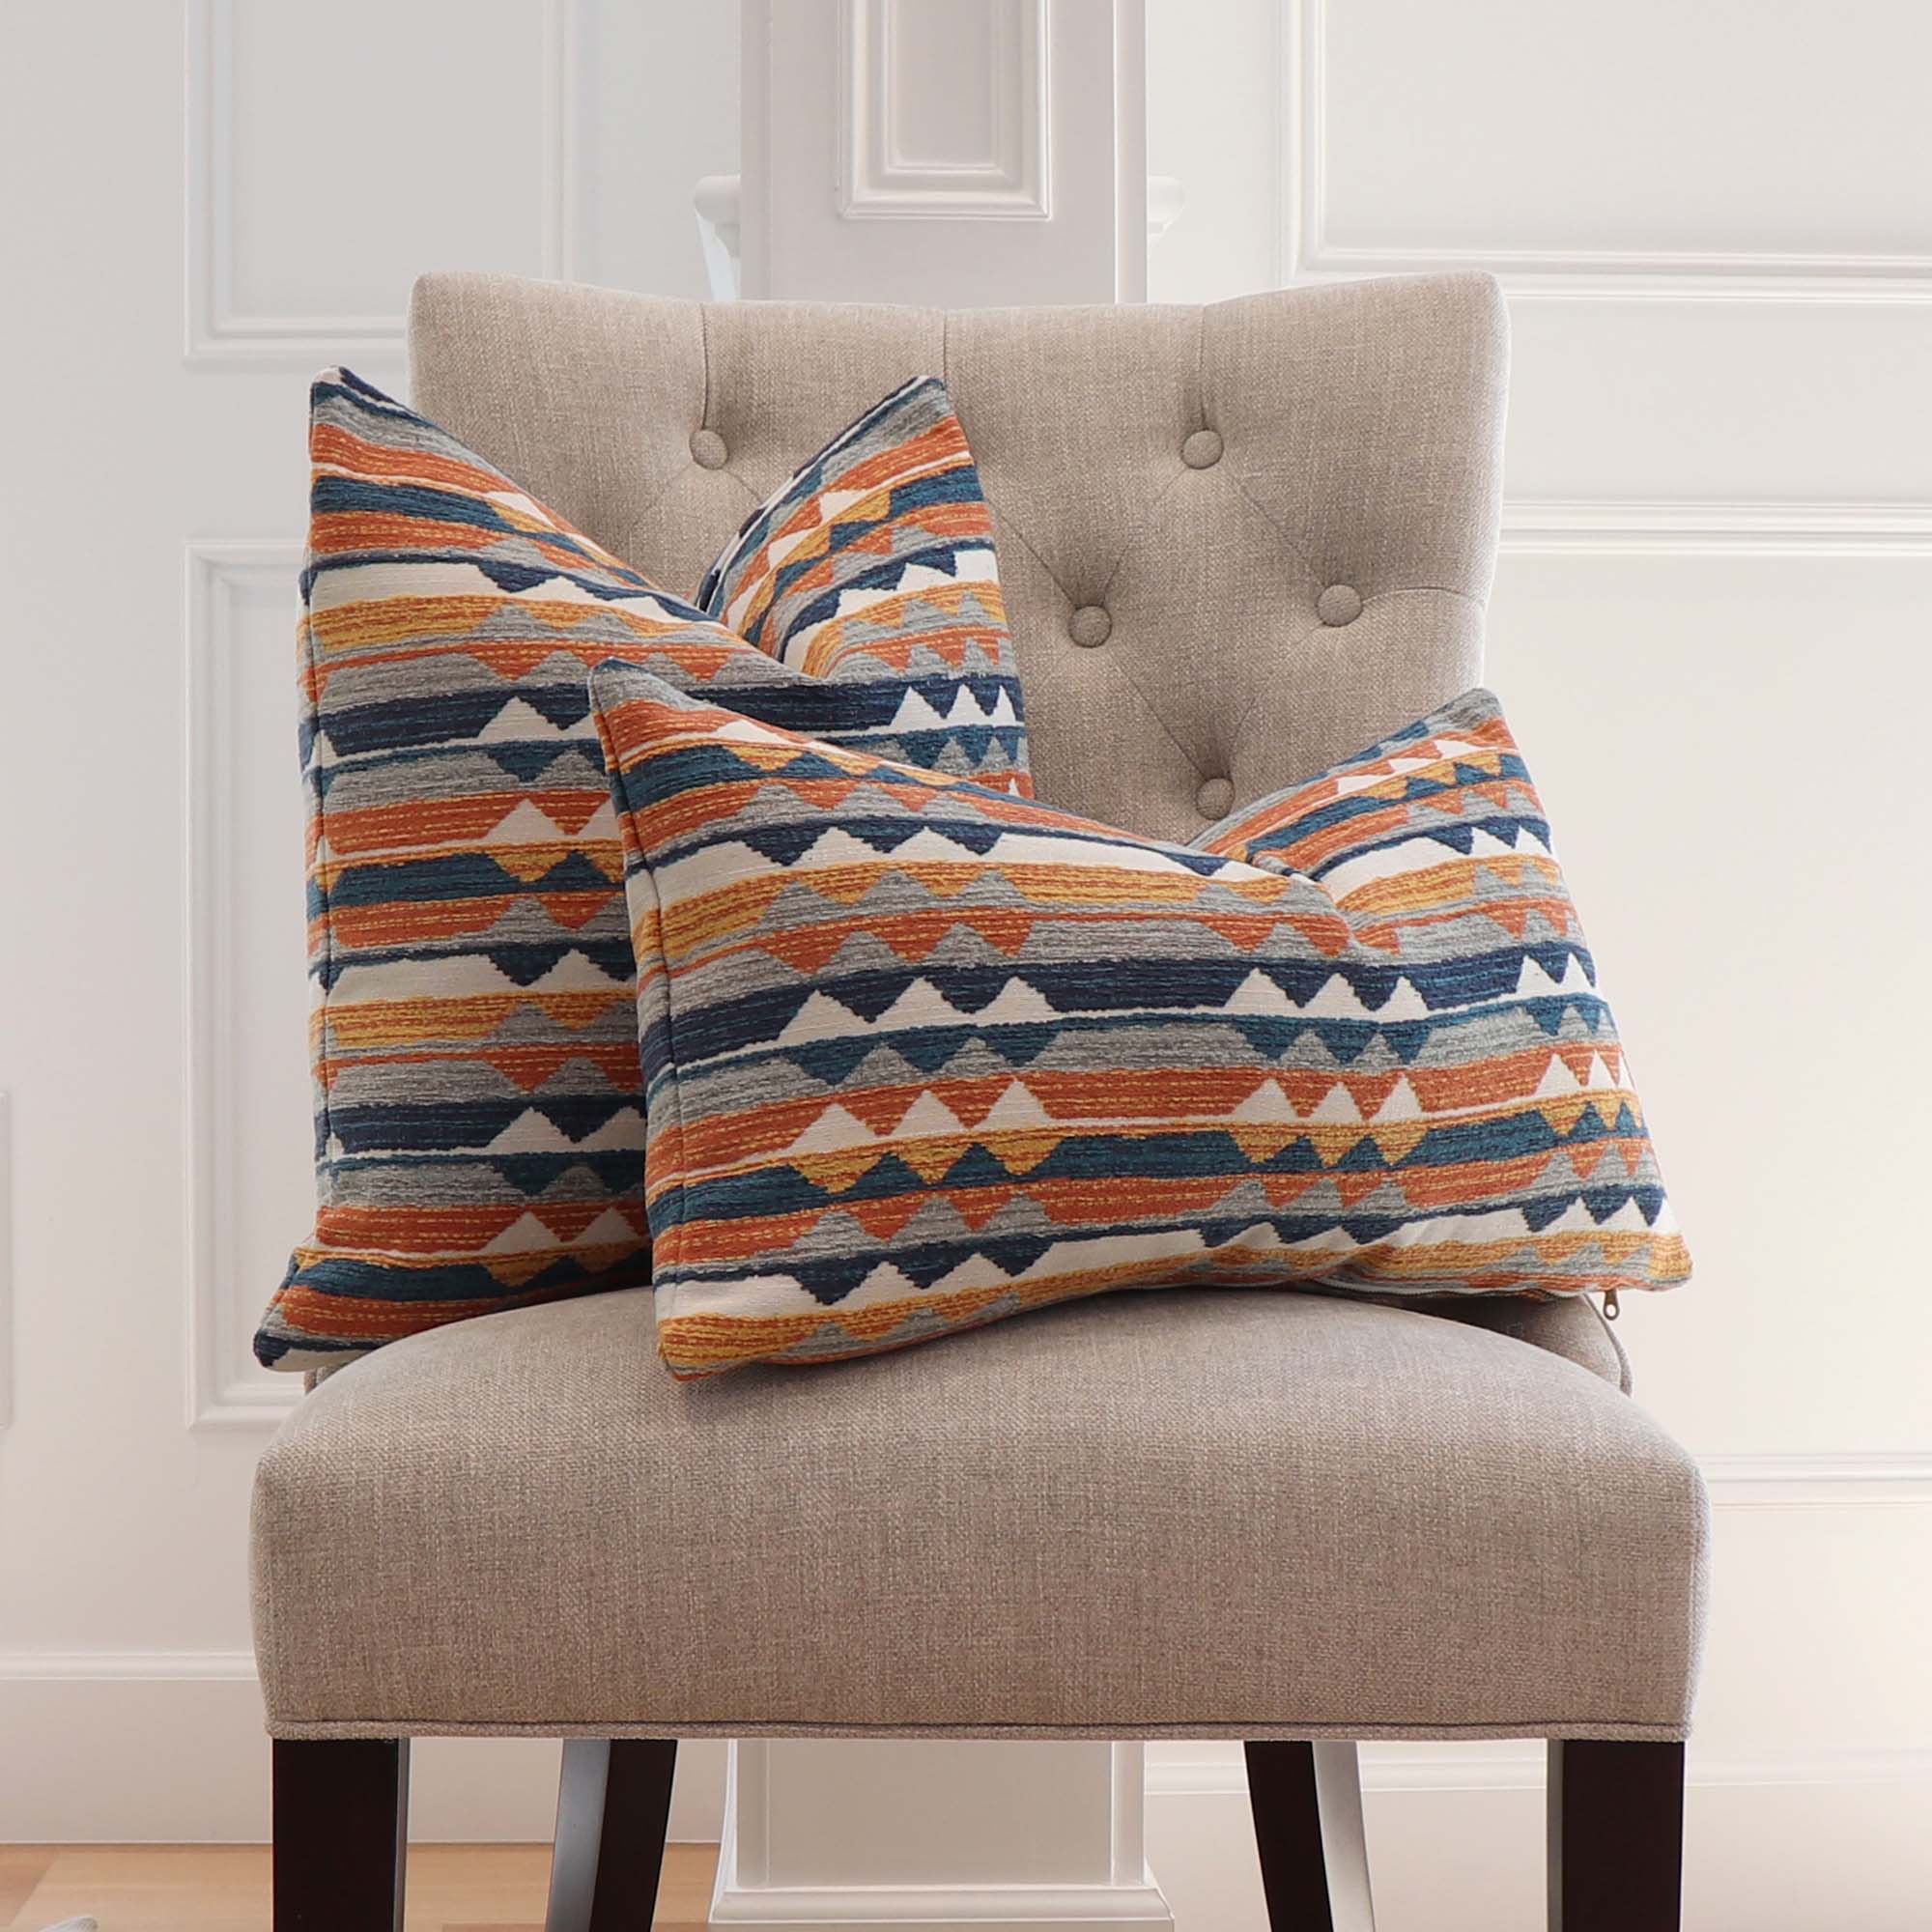 Thibaut Performance Saranac Canyon Orange Blue Woven Ikat Kilim Pattern Designer Luxury Throw Pillow Cover on Dining Chair in Home